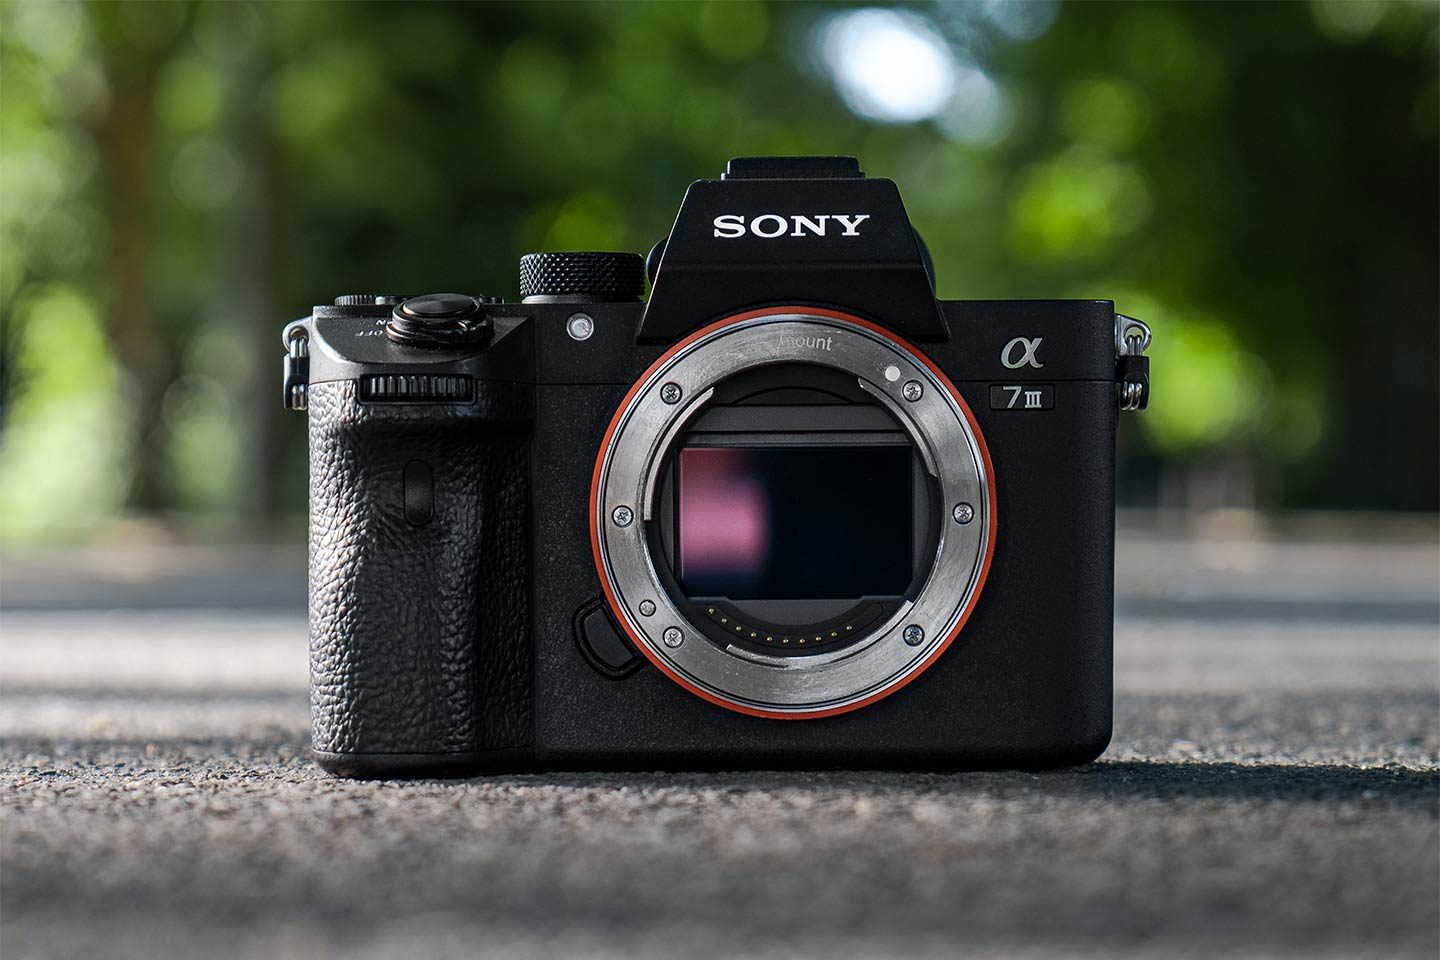 A Sony mirrorless camera is pictured on the ground without the lens on. This means you can see inside of the camera and you can see what the sensor on the inside of the camera looks like.